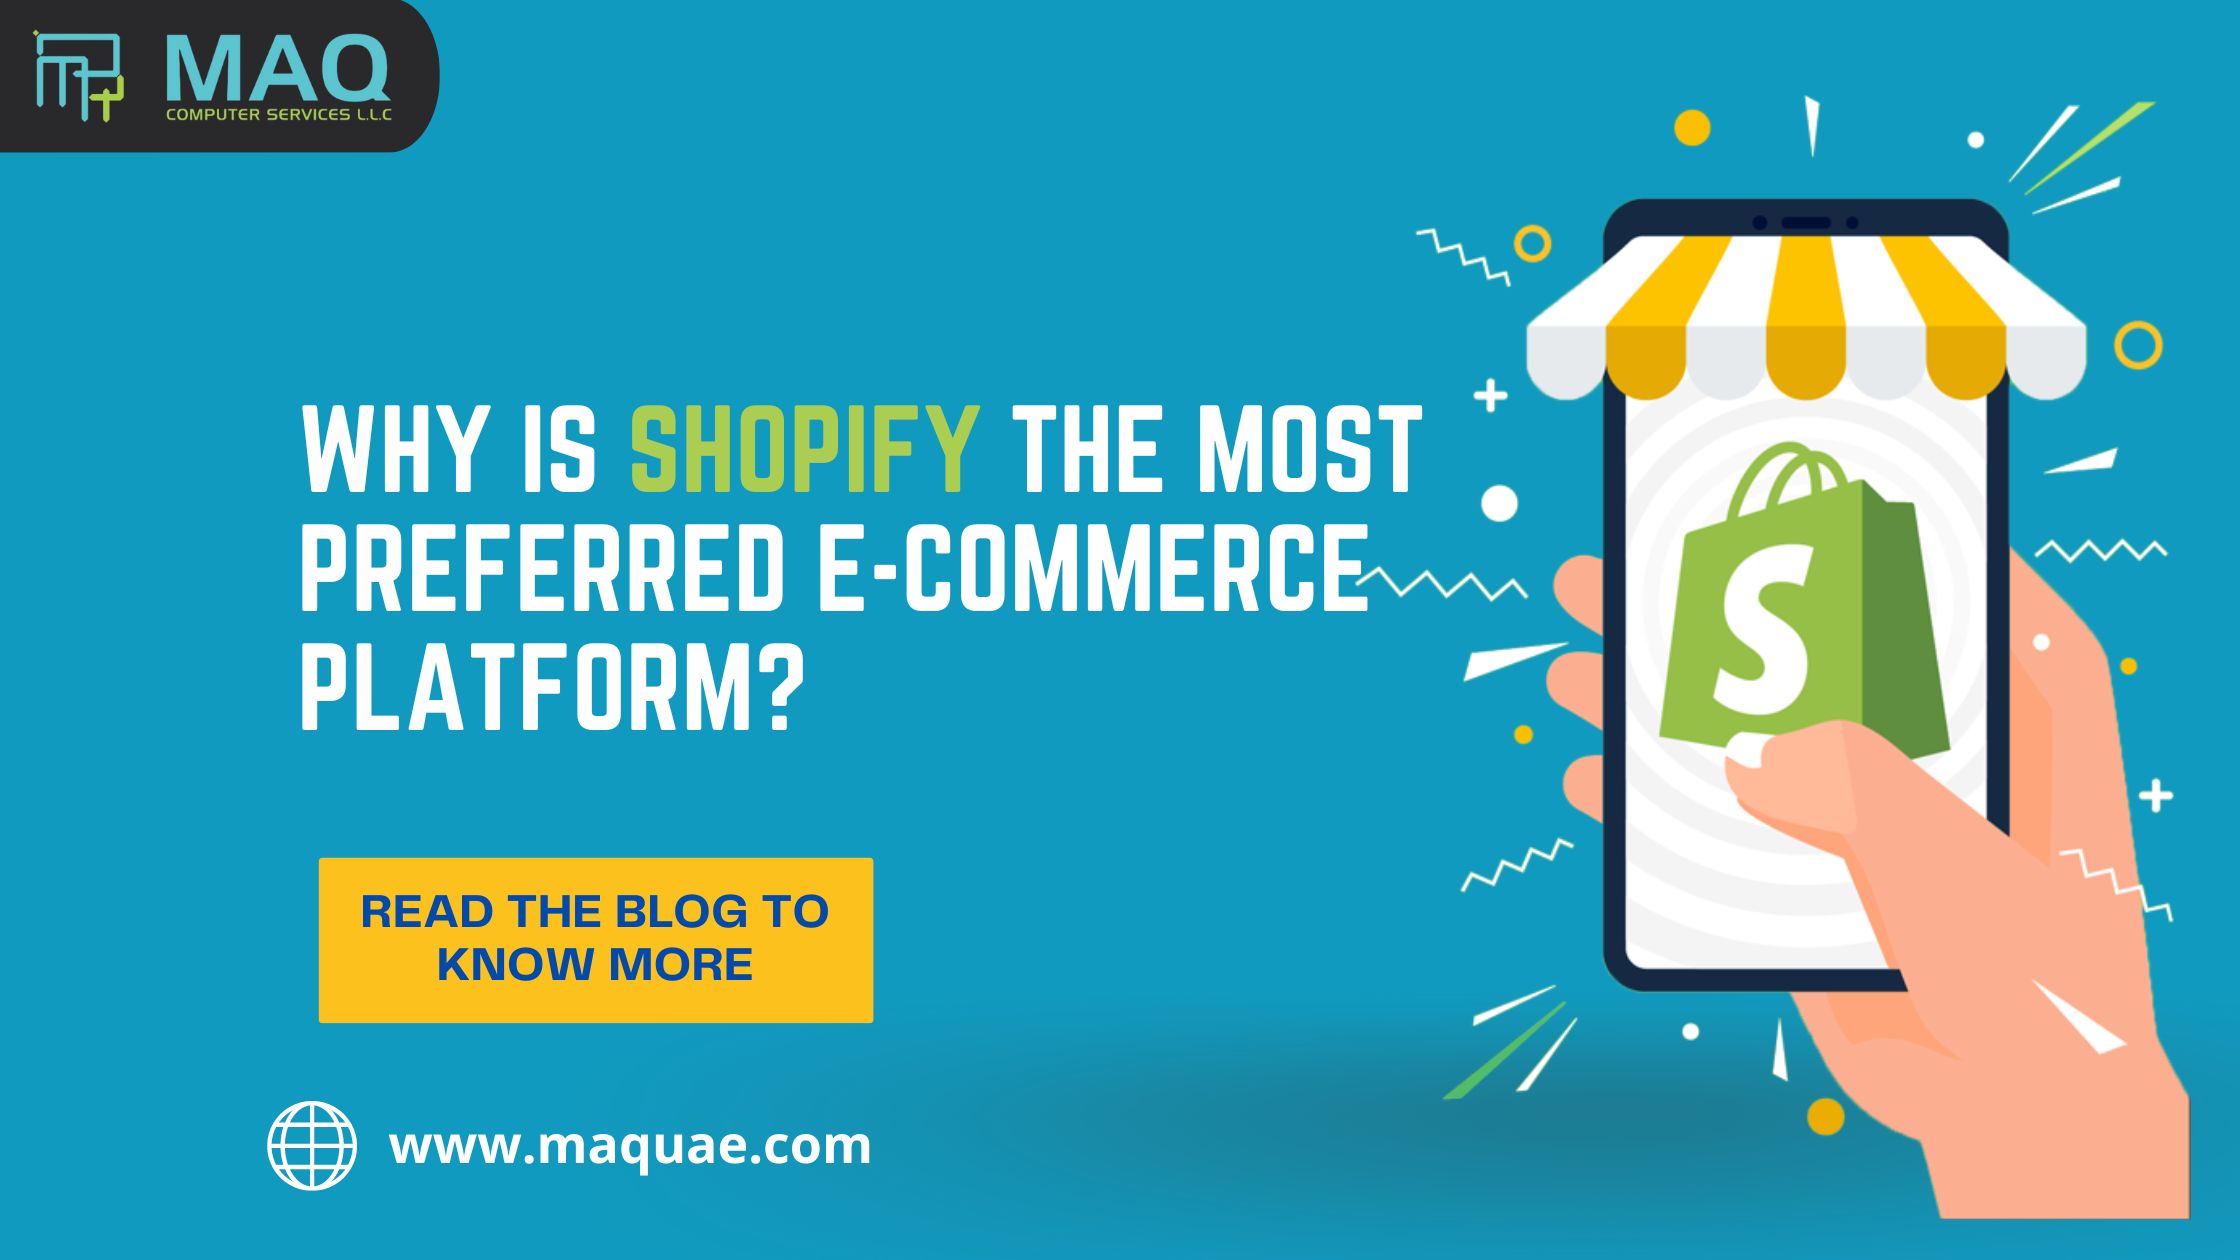 Why Is Shopify The Most Preferred E-Commerce Platform?